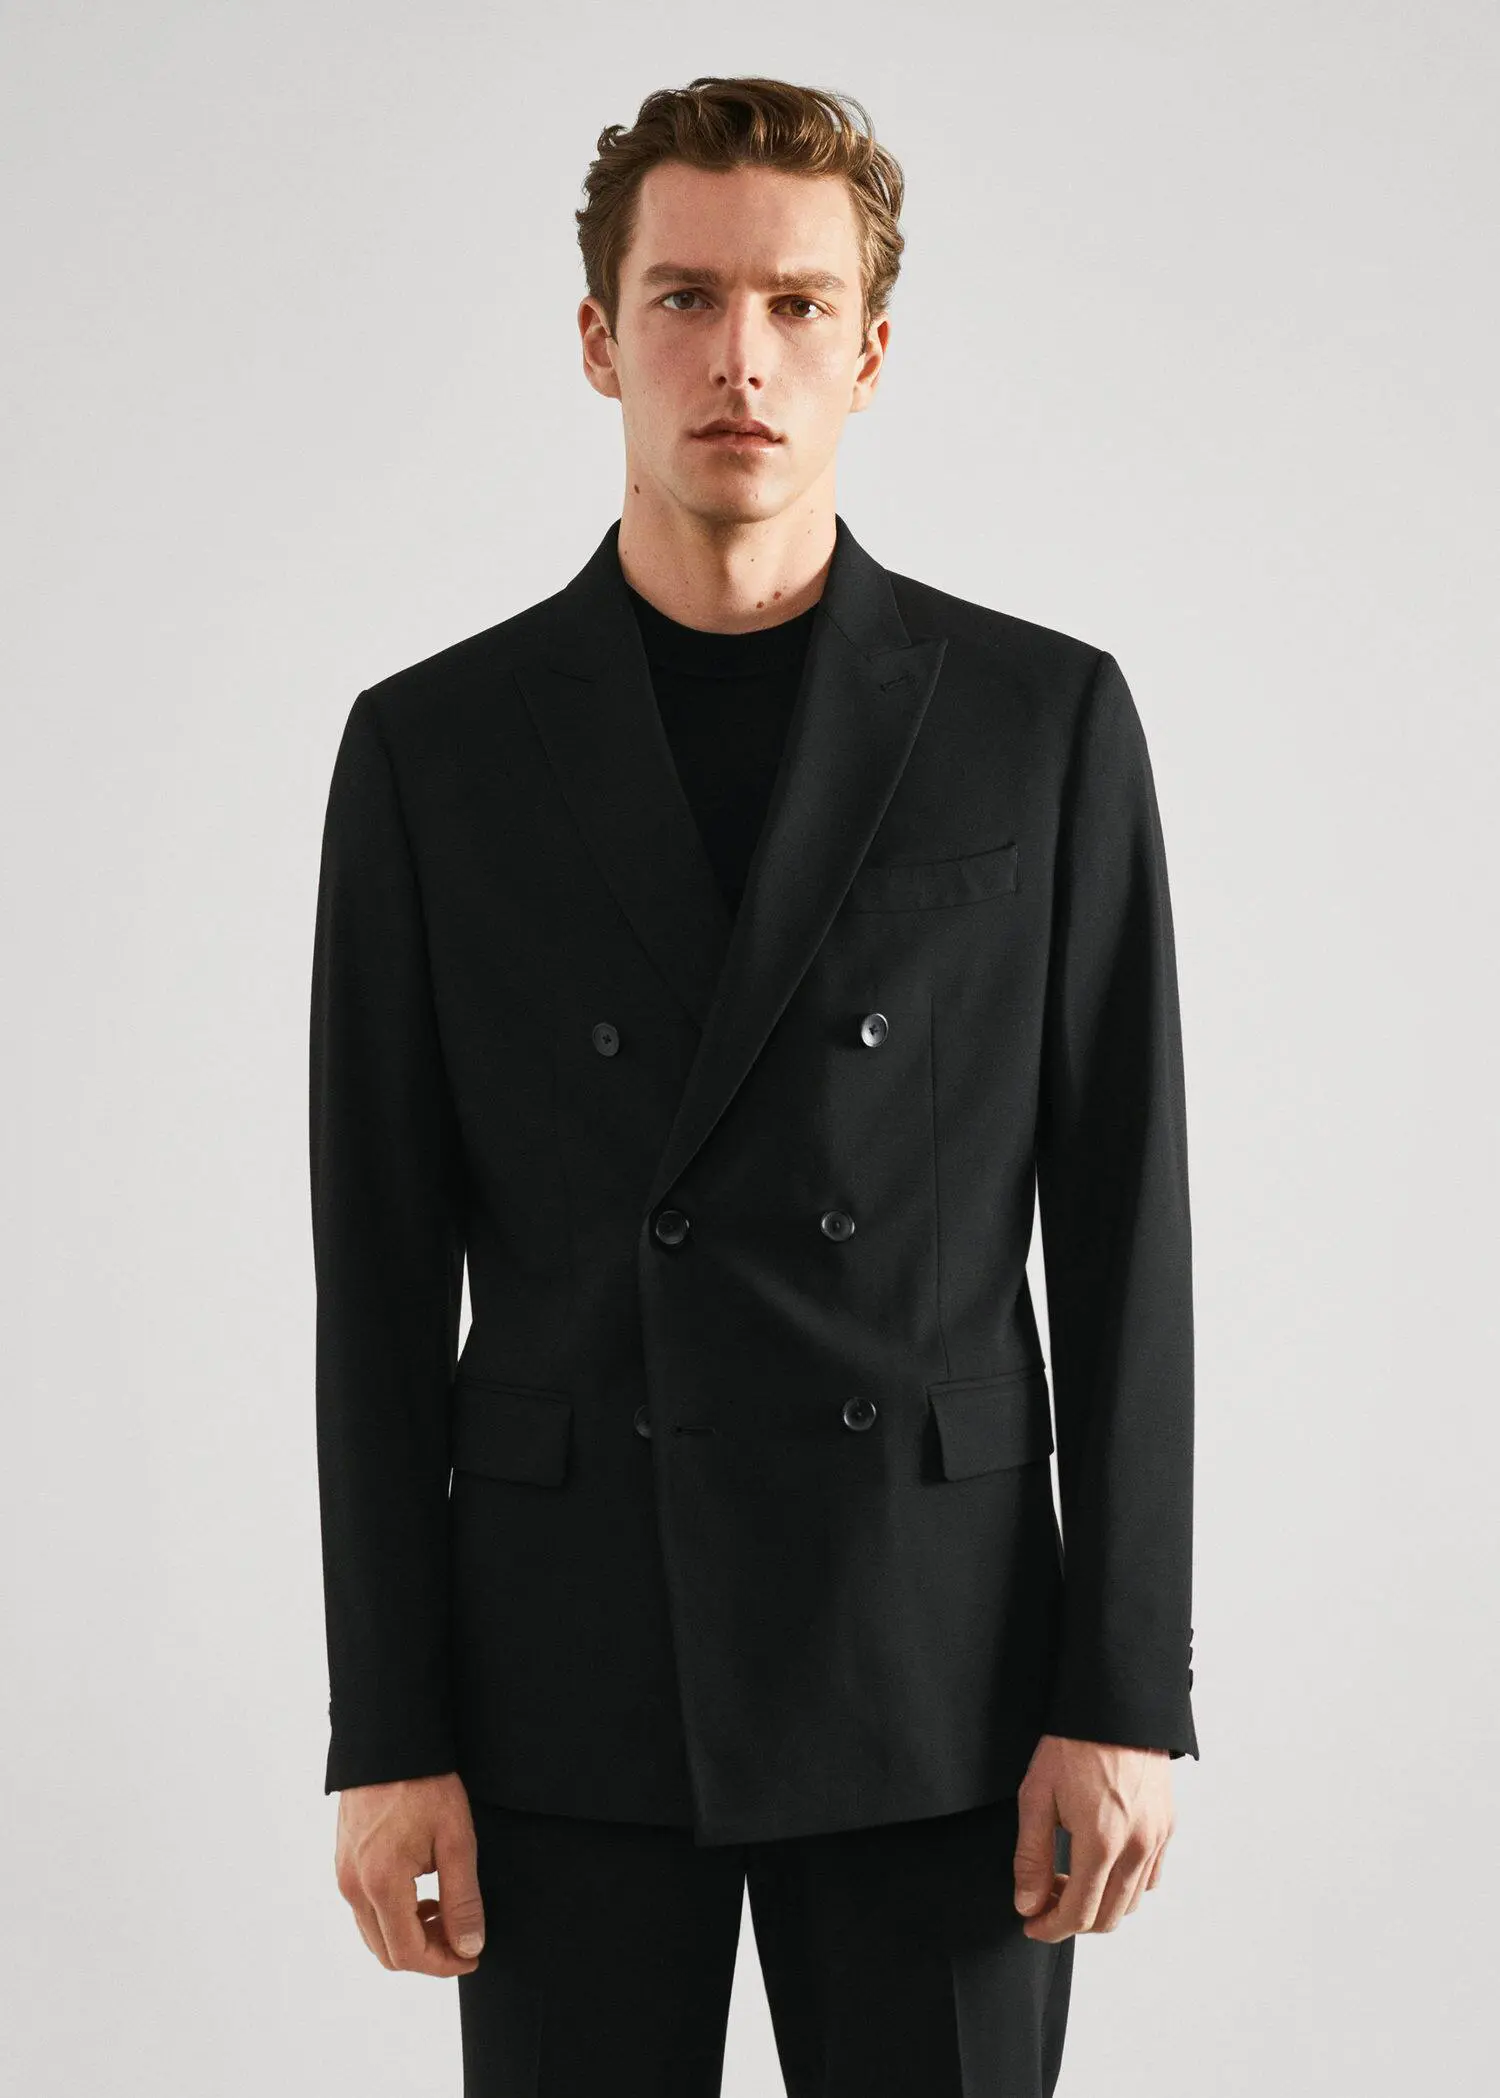 Mango Slim fit double-breasted suit blazer. a man wearing a black suit standing in front of a white wall. 